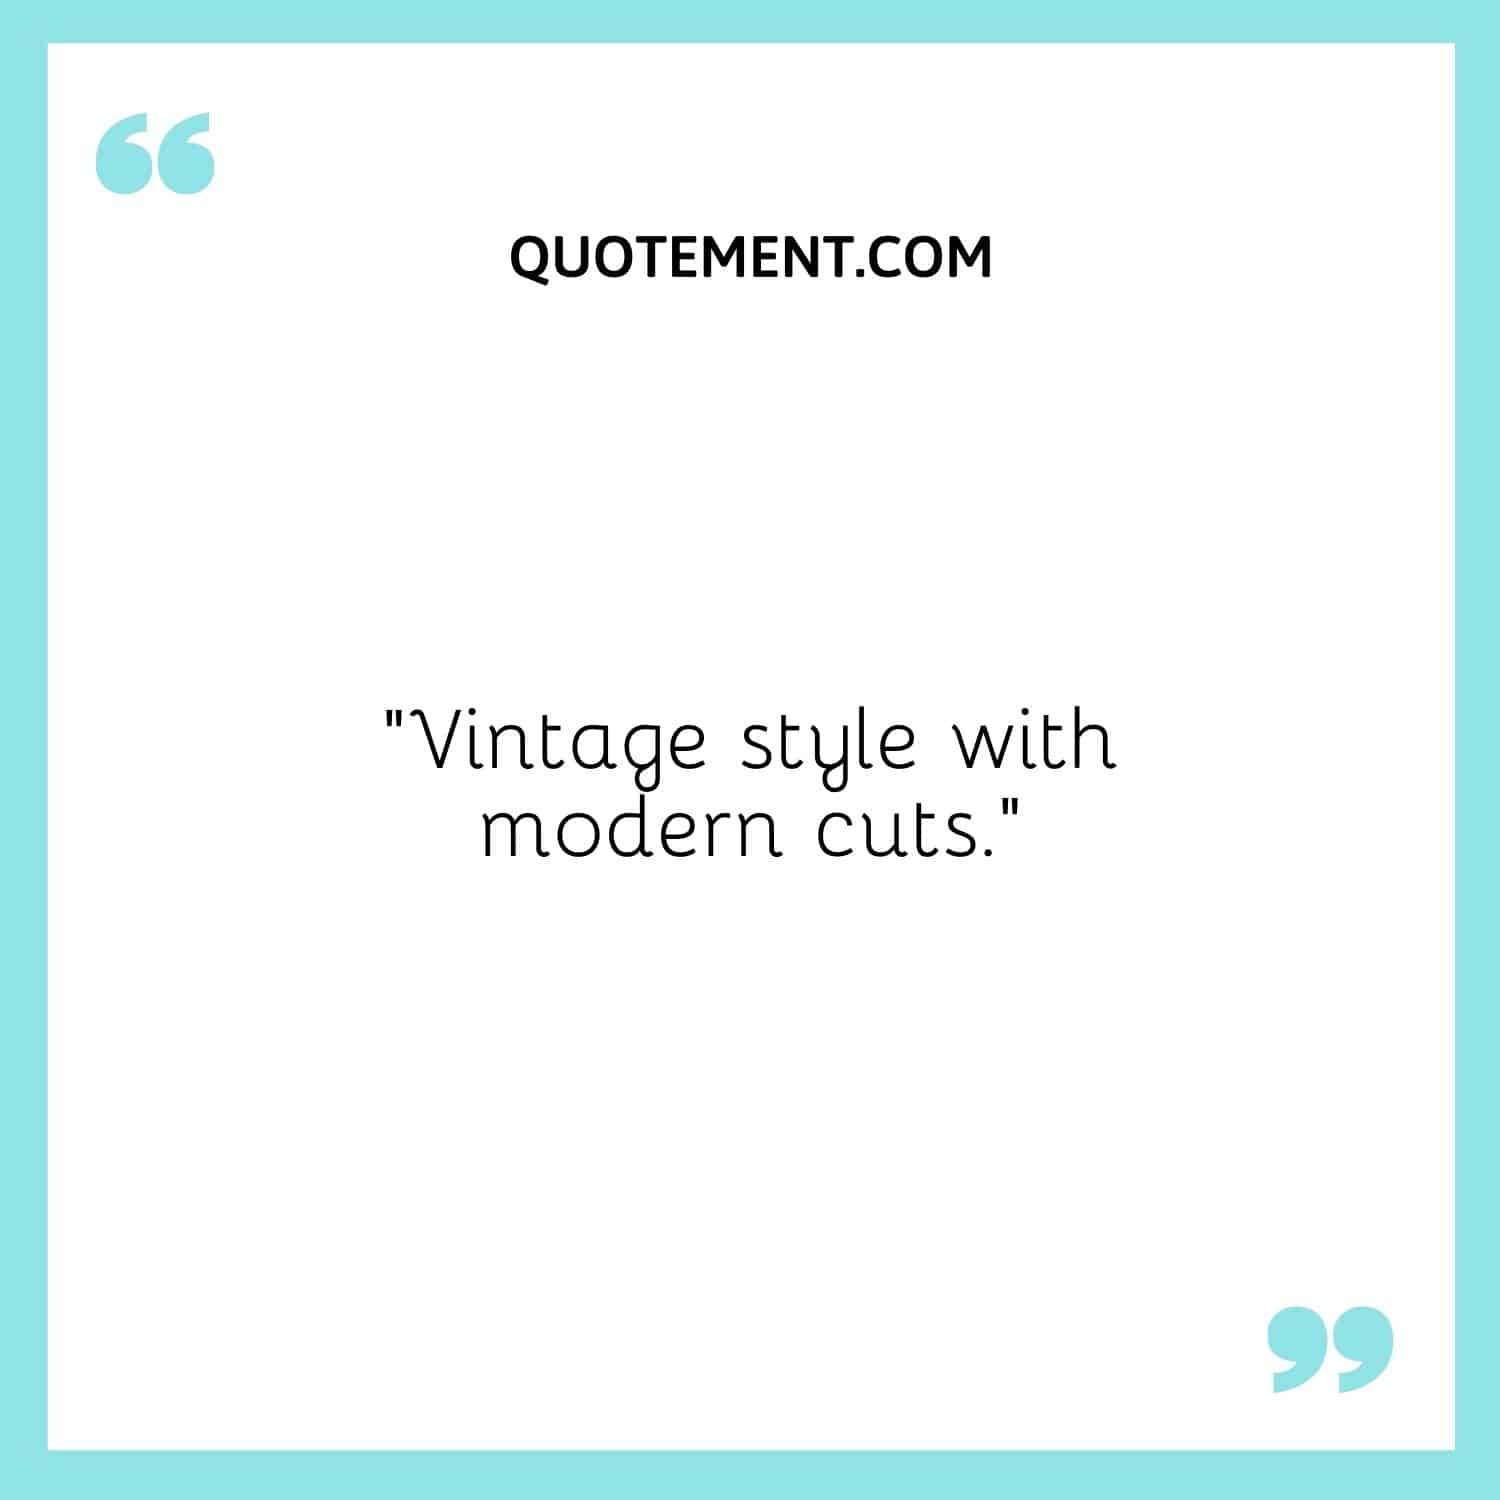 Vintage style with modern cuts.